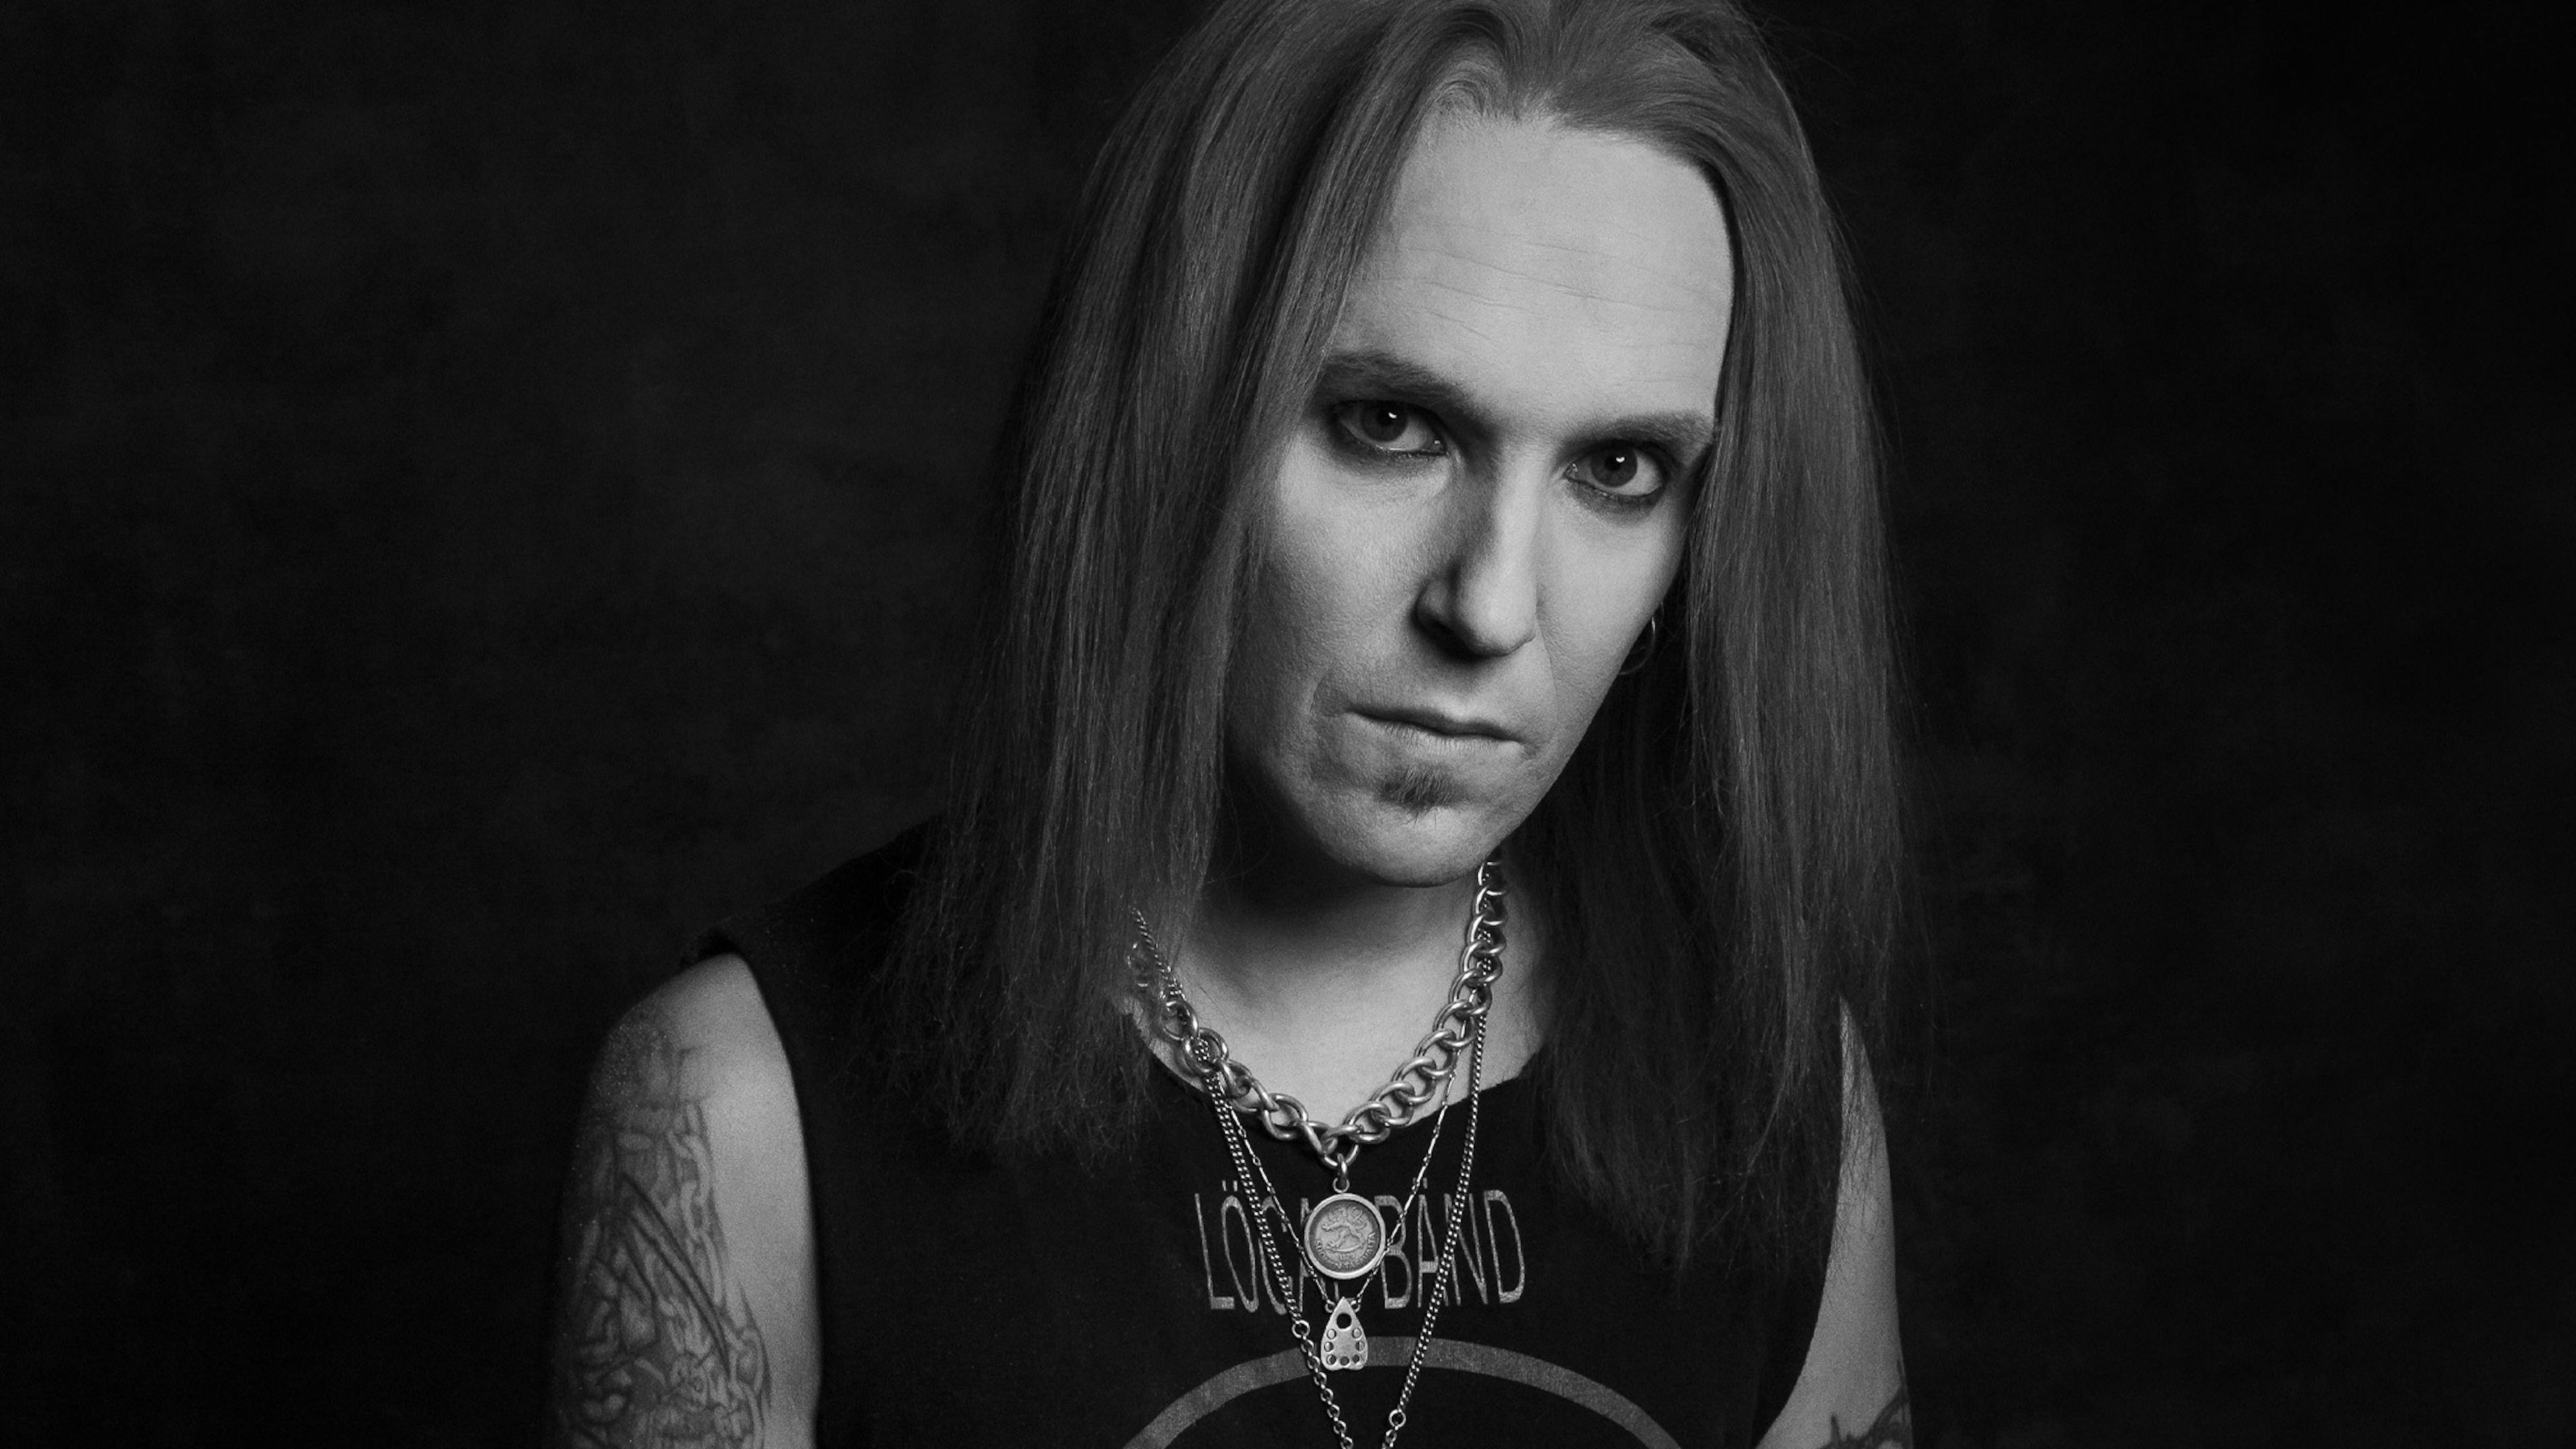 Children Of Bodom's Alexi Laiho dies aged 41